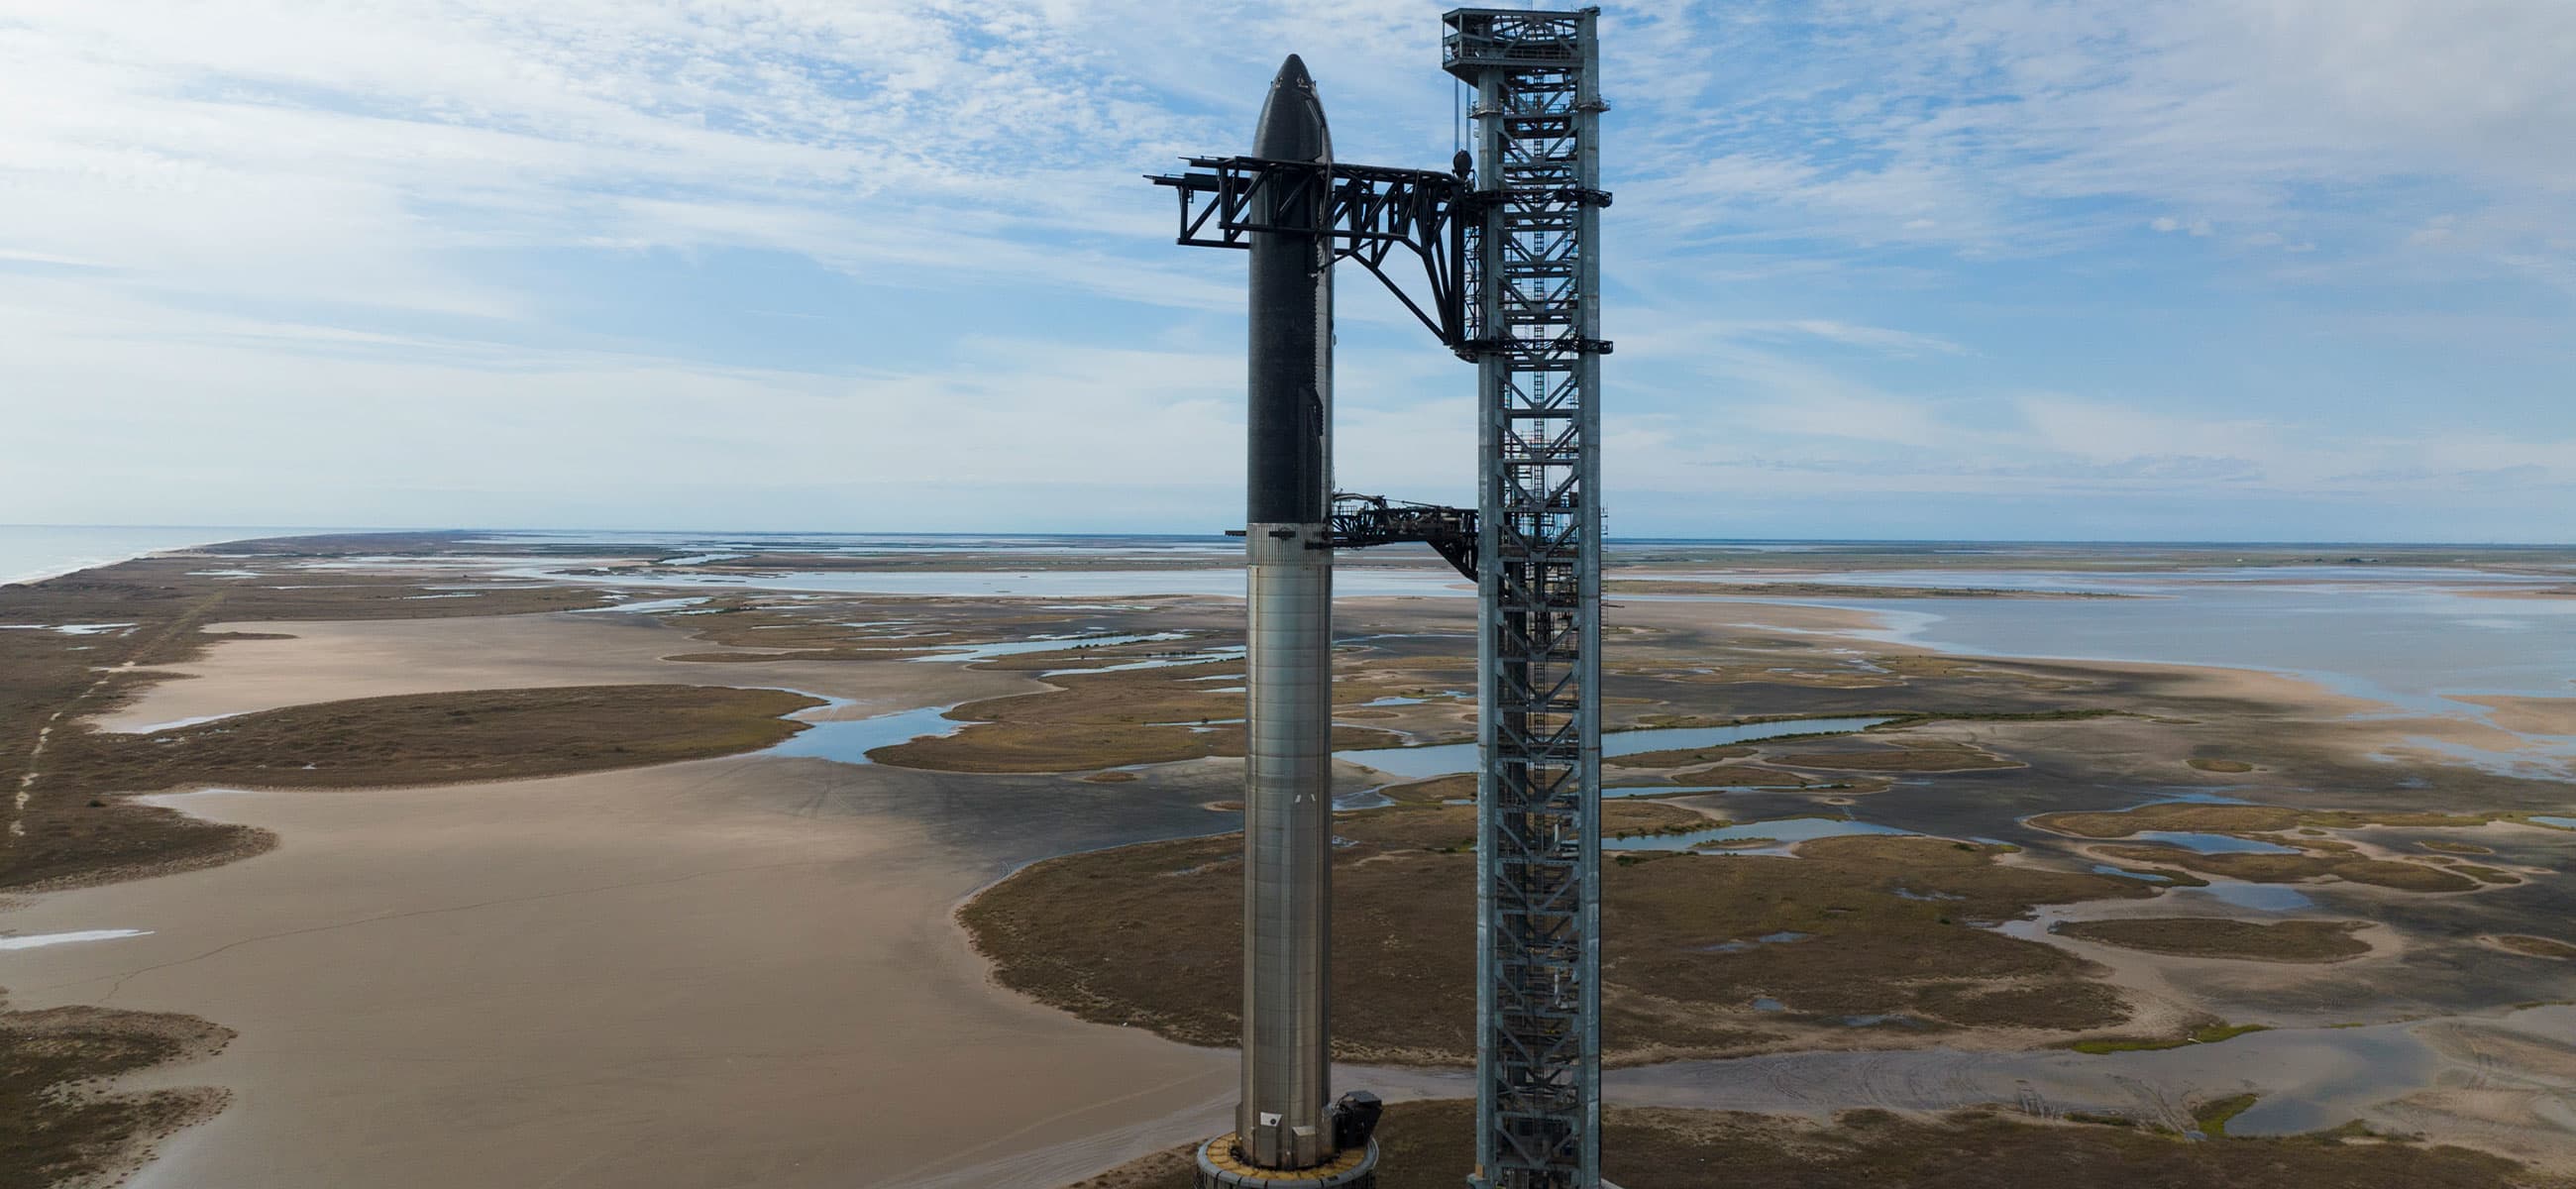 Why Starship is indispensable for the future of SpaceX